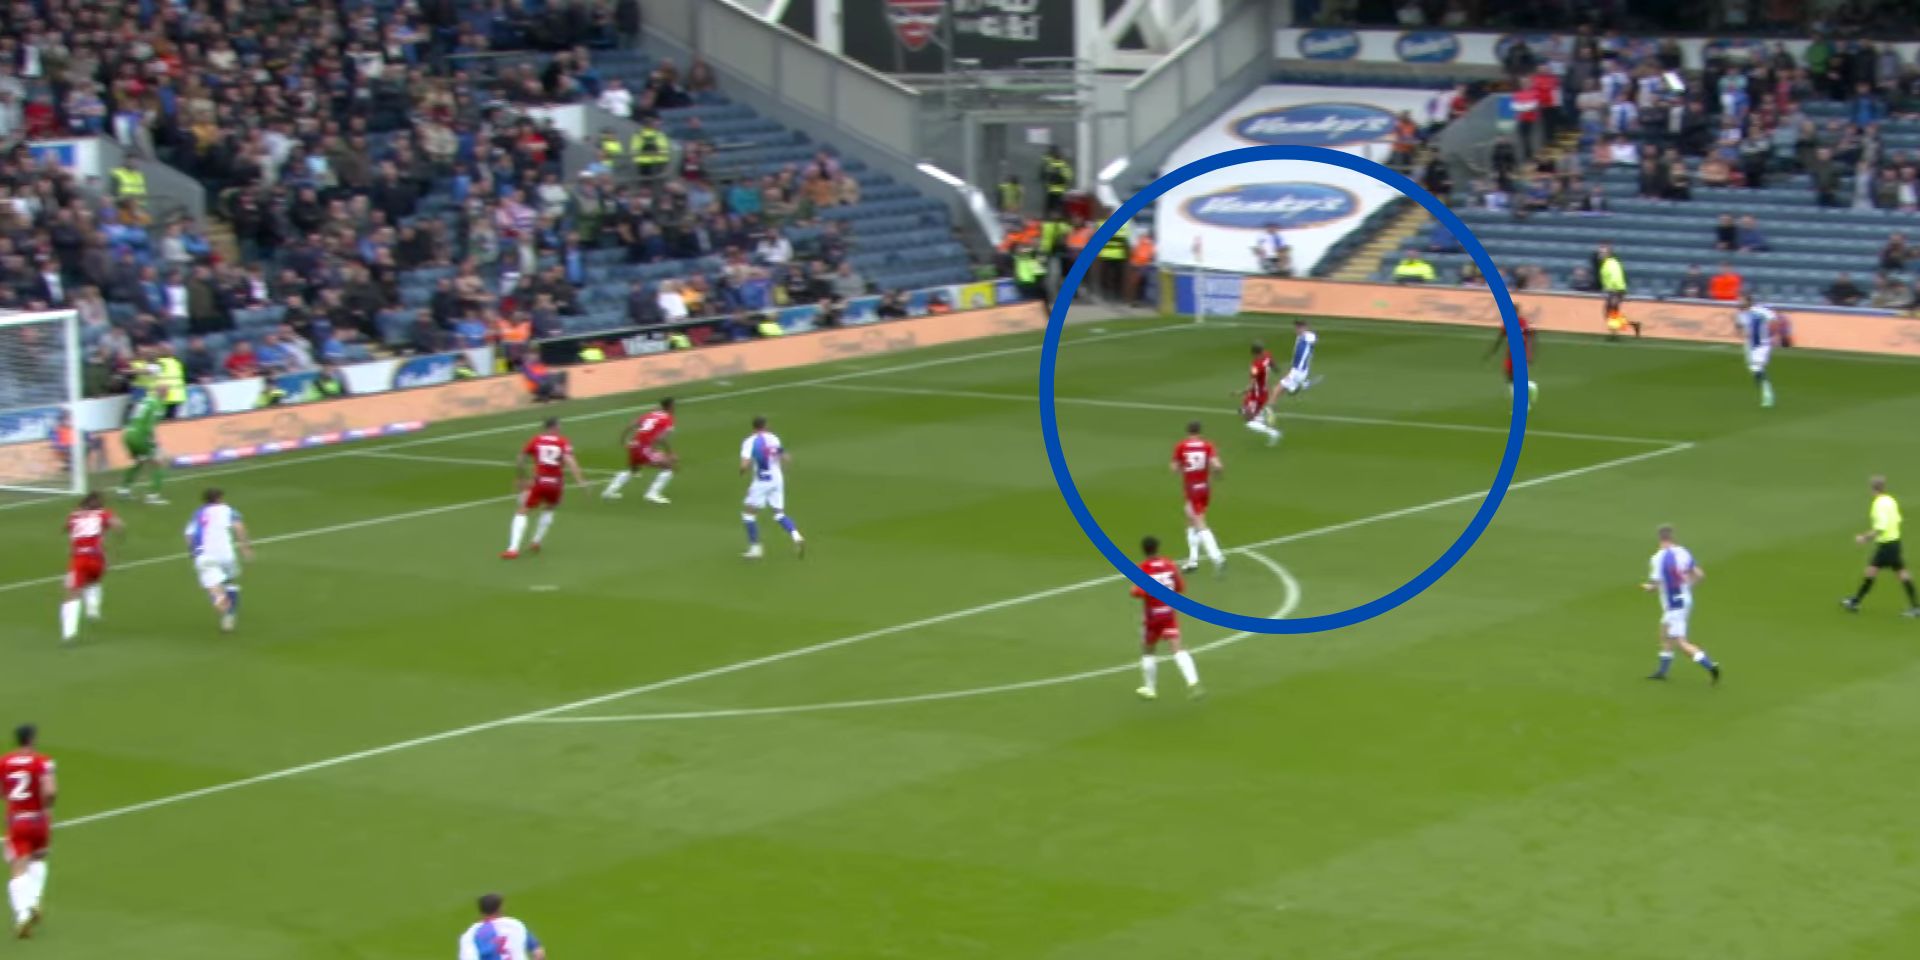 (Video) Tyler Morton provides an assist for Blackburn after brilliant cross and wing play